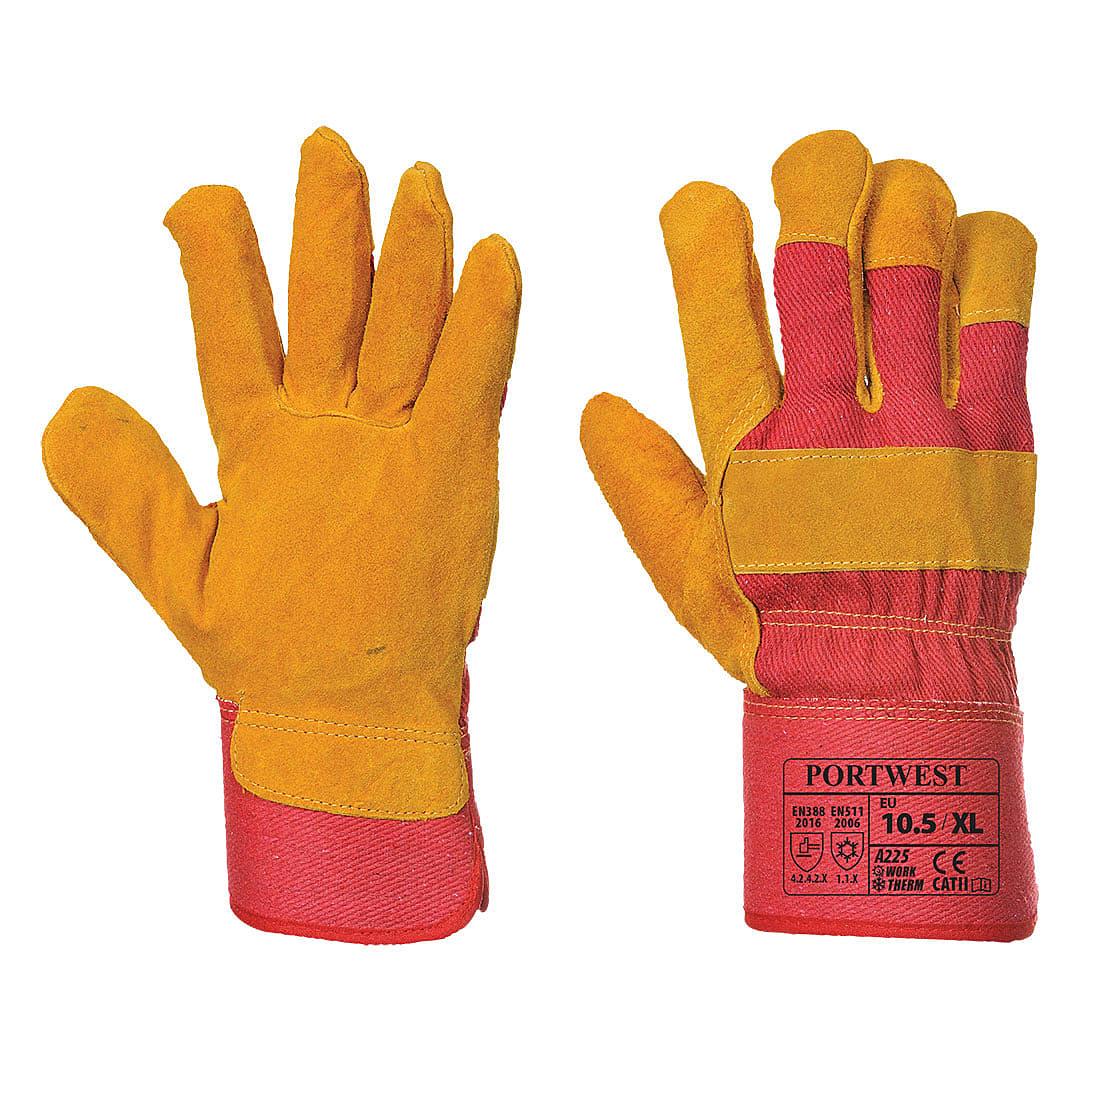 Portwest Fleece Lined Rigger Gloves in Red (Product Code: A225)